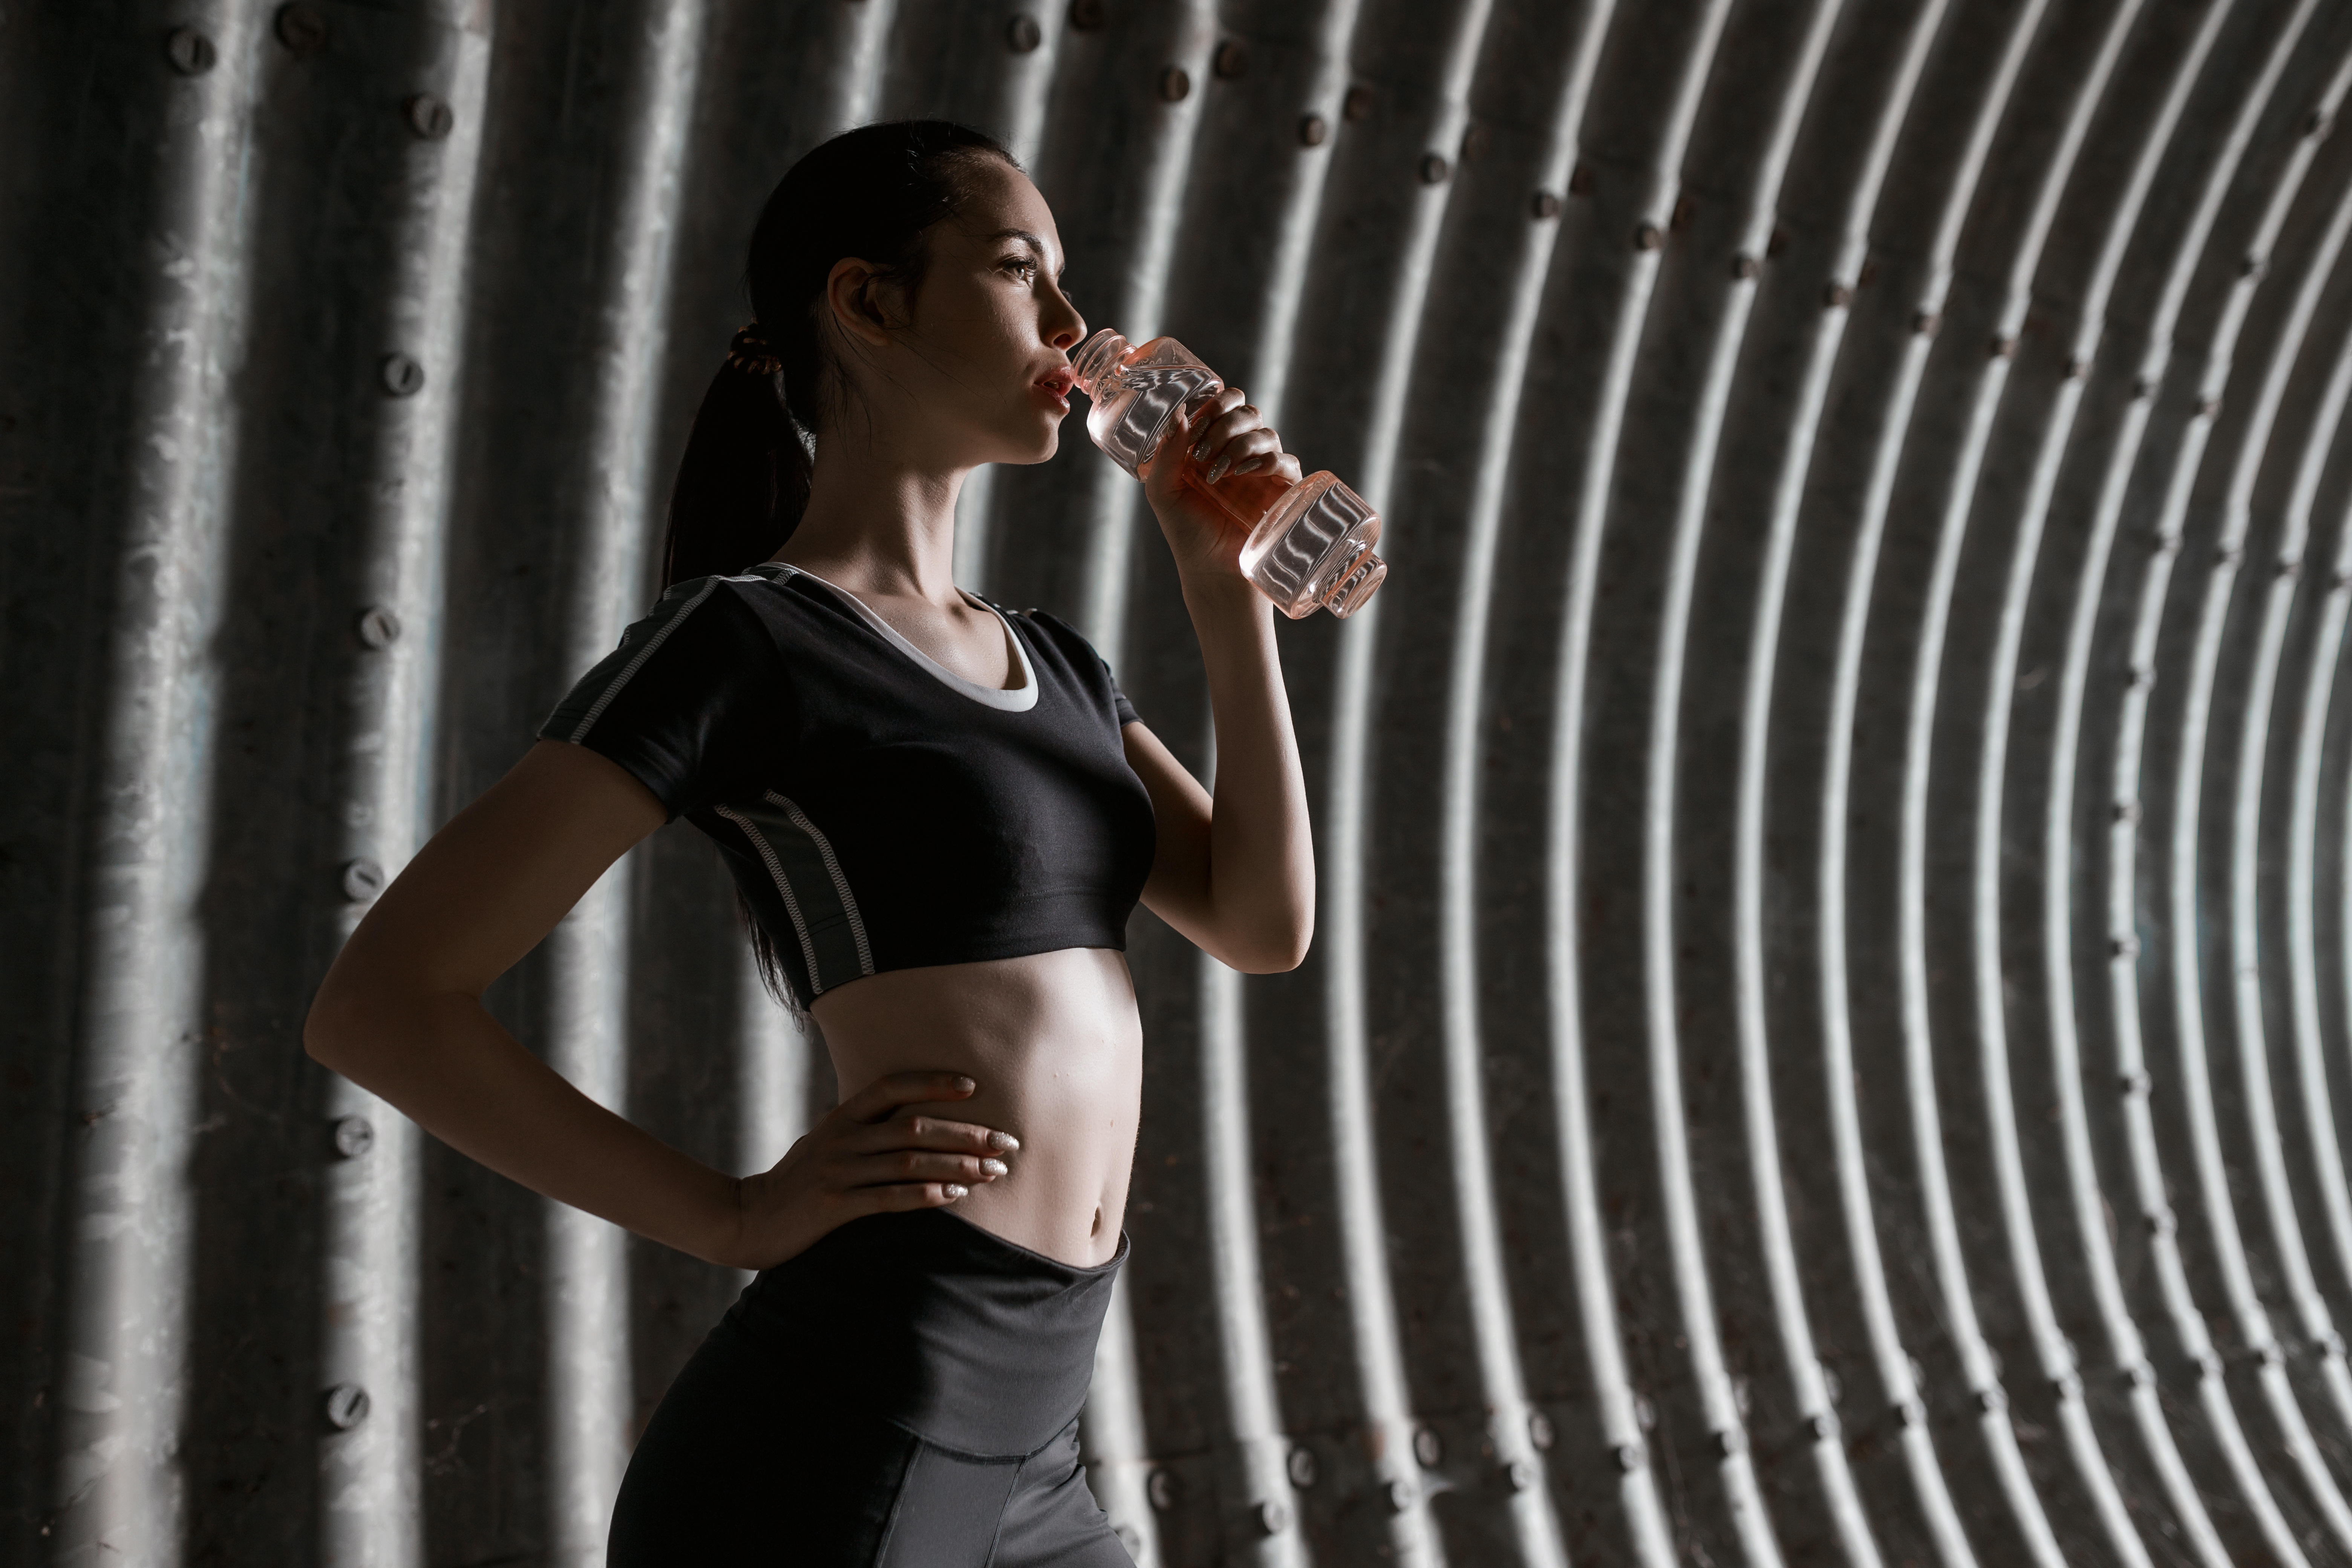 The sportswoman drinks water in the tunnel